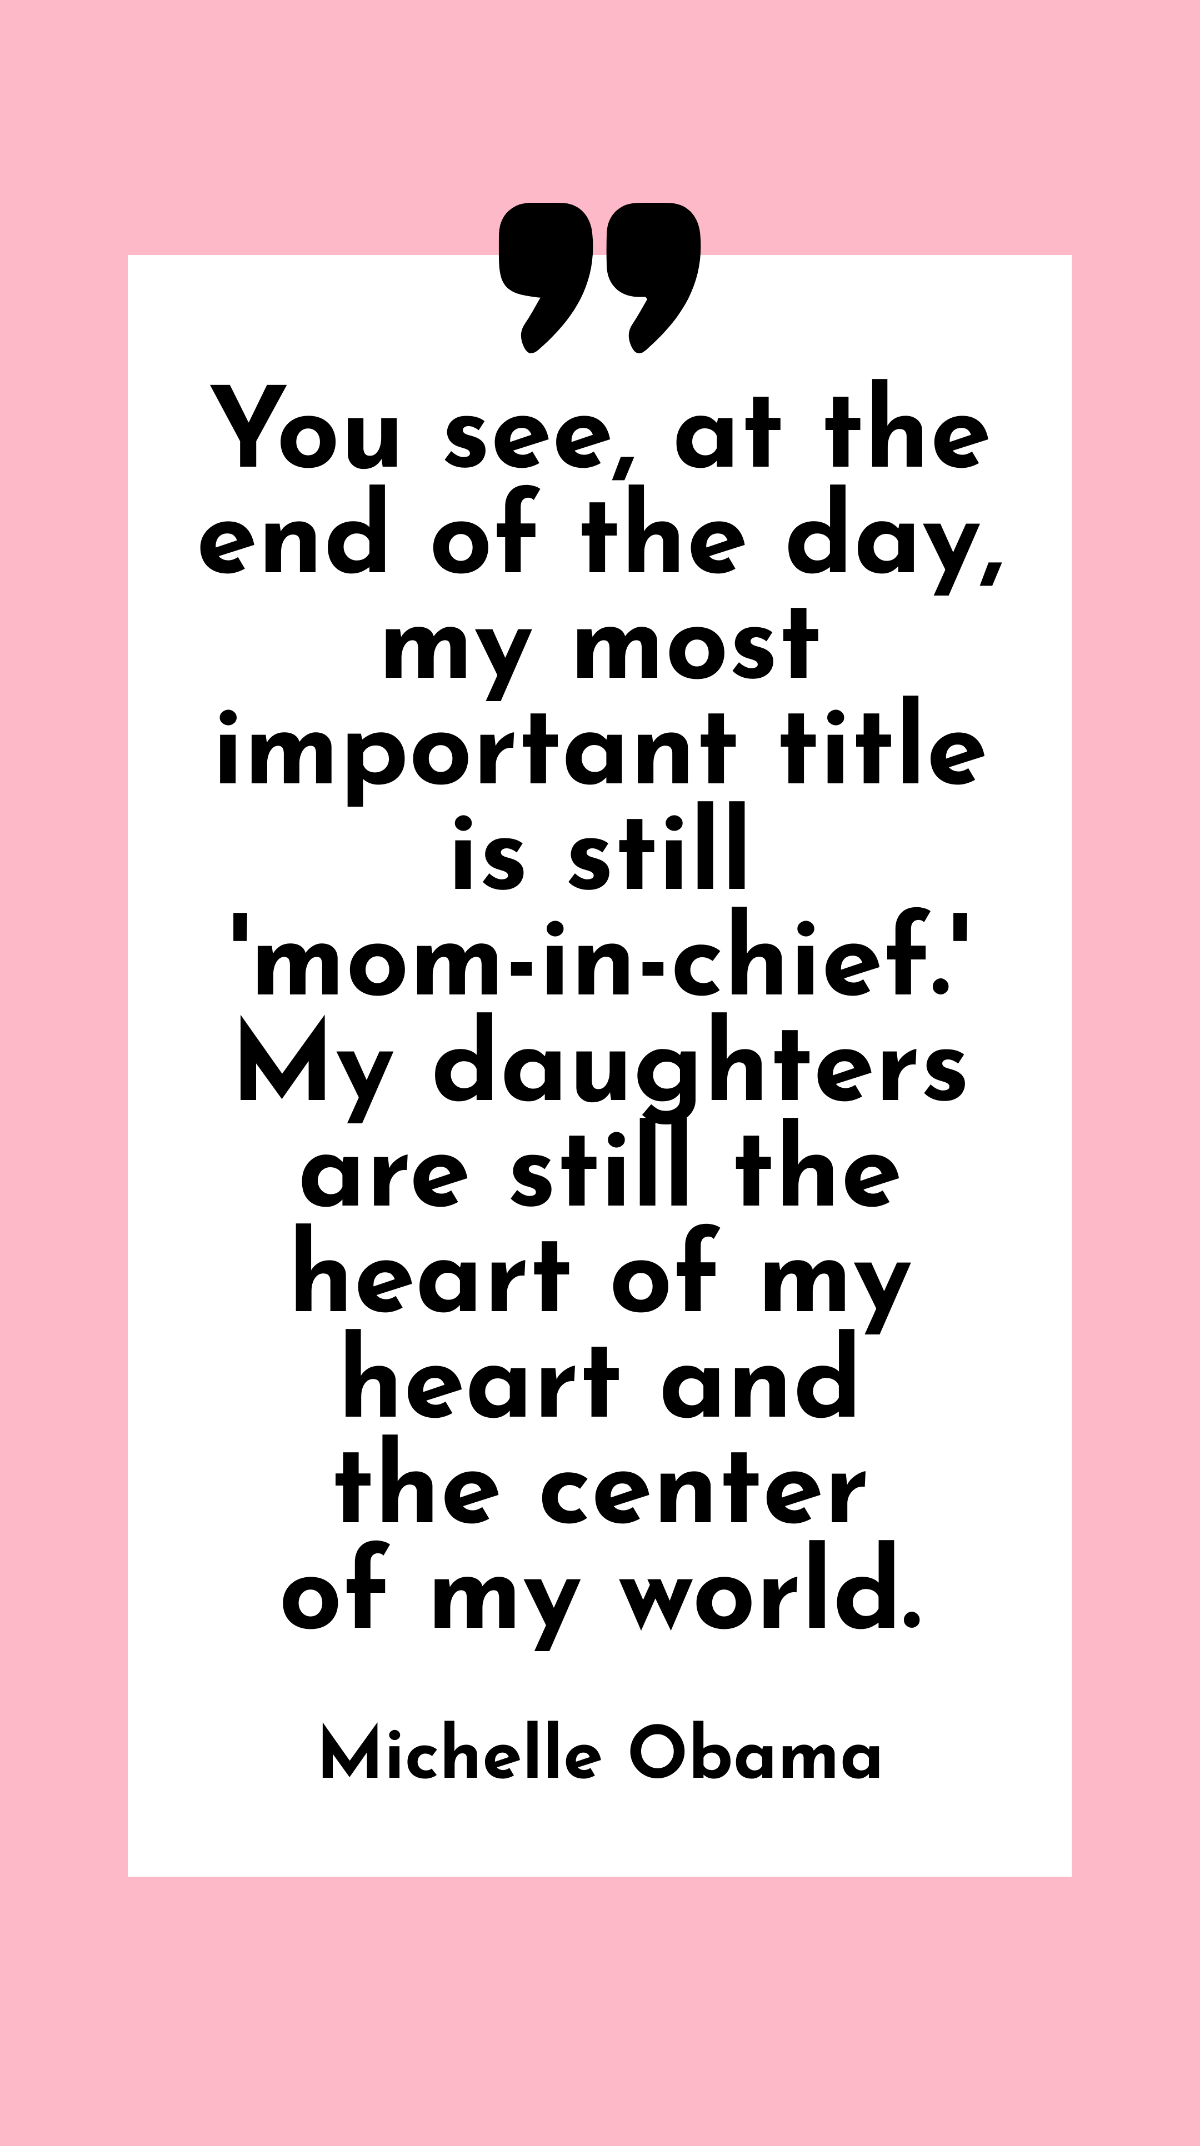 Michelle Obama - You see, at the end of the day, my most important title is still 'mom-in-chief.' My daughters are still the heart of my heart and the center of my world.